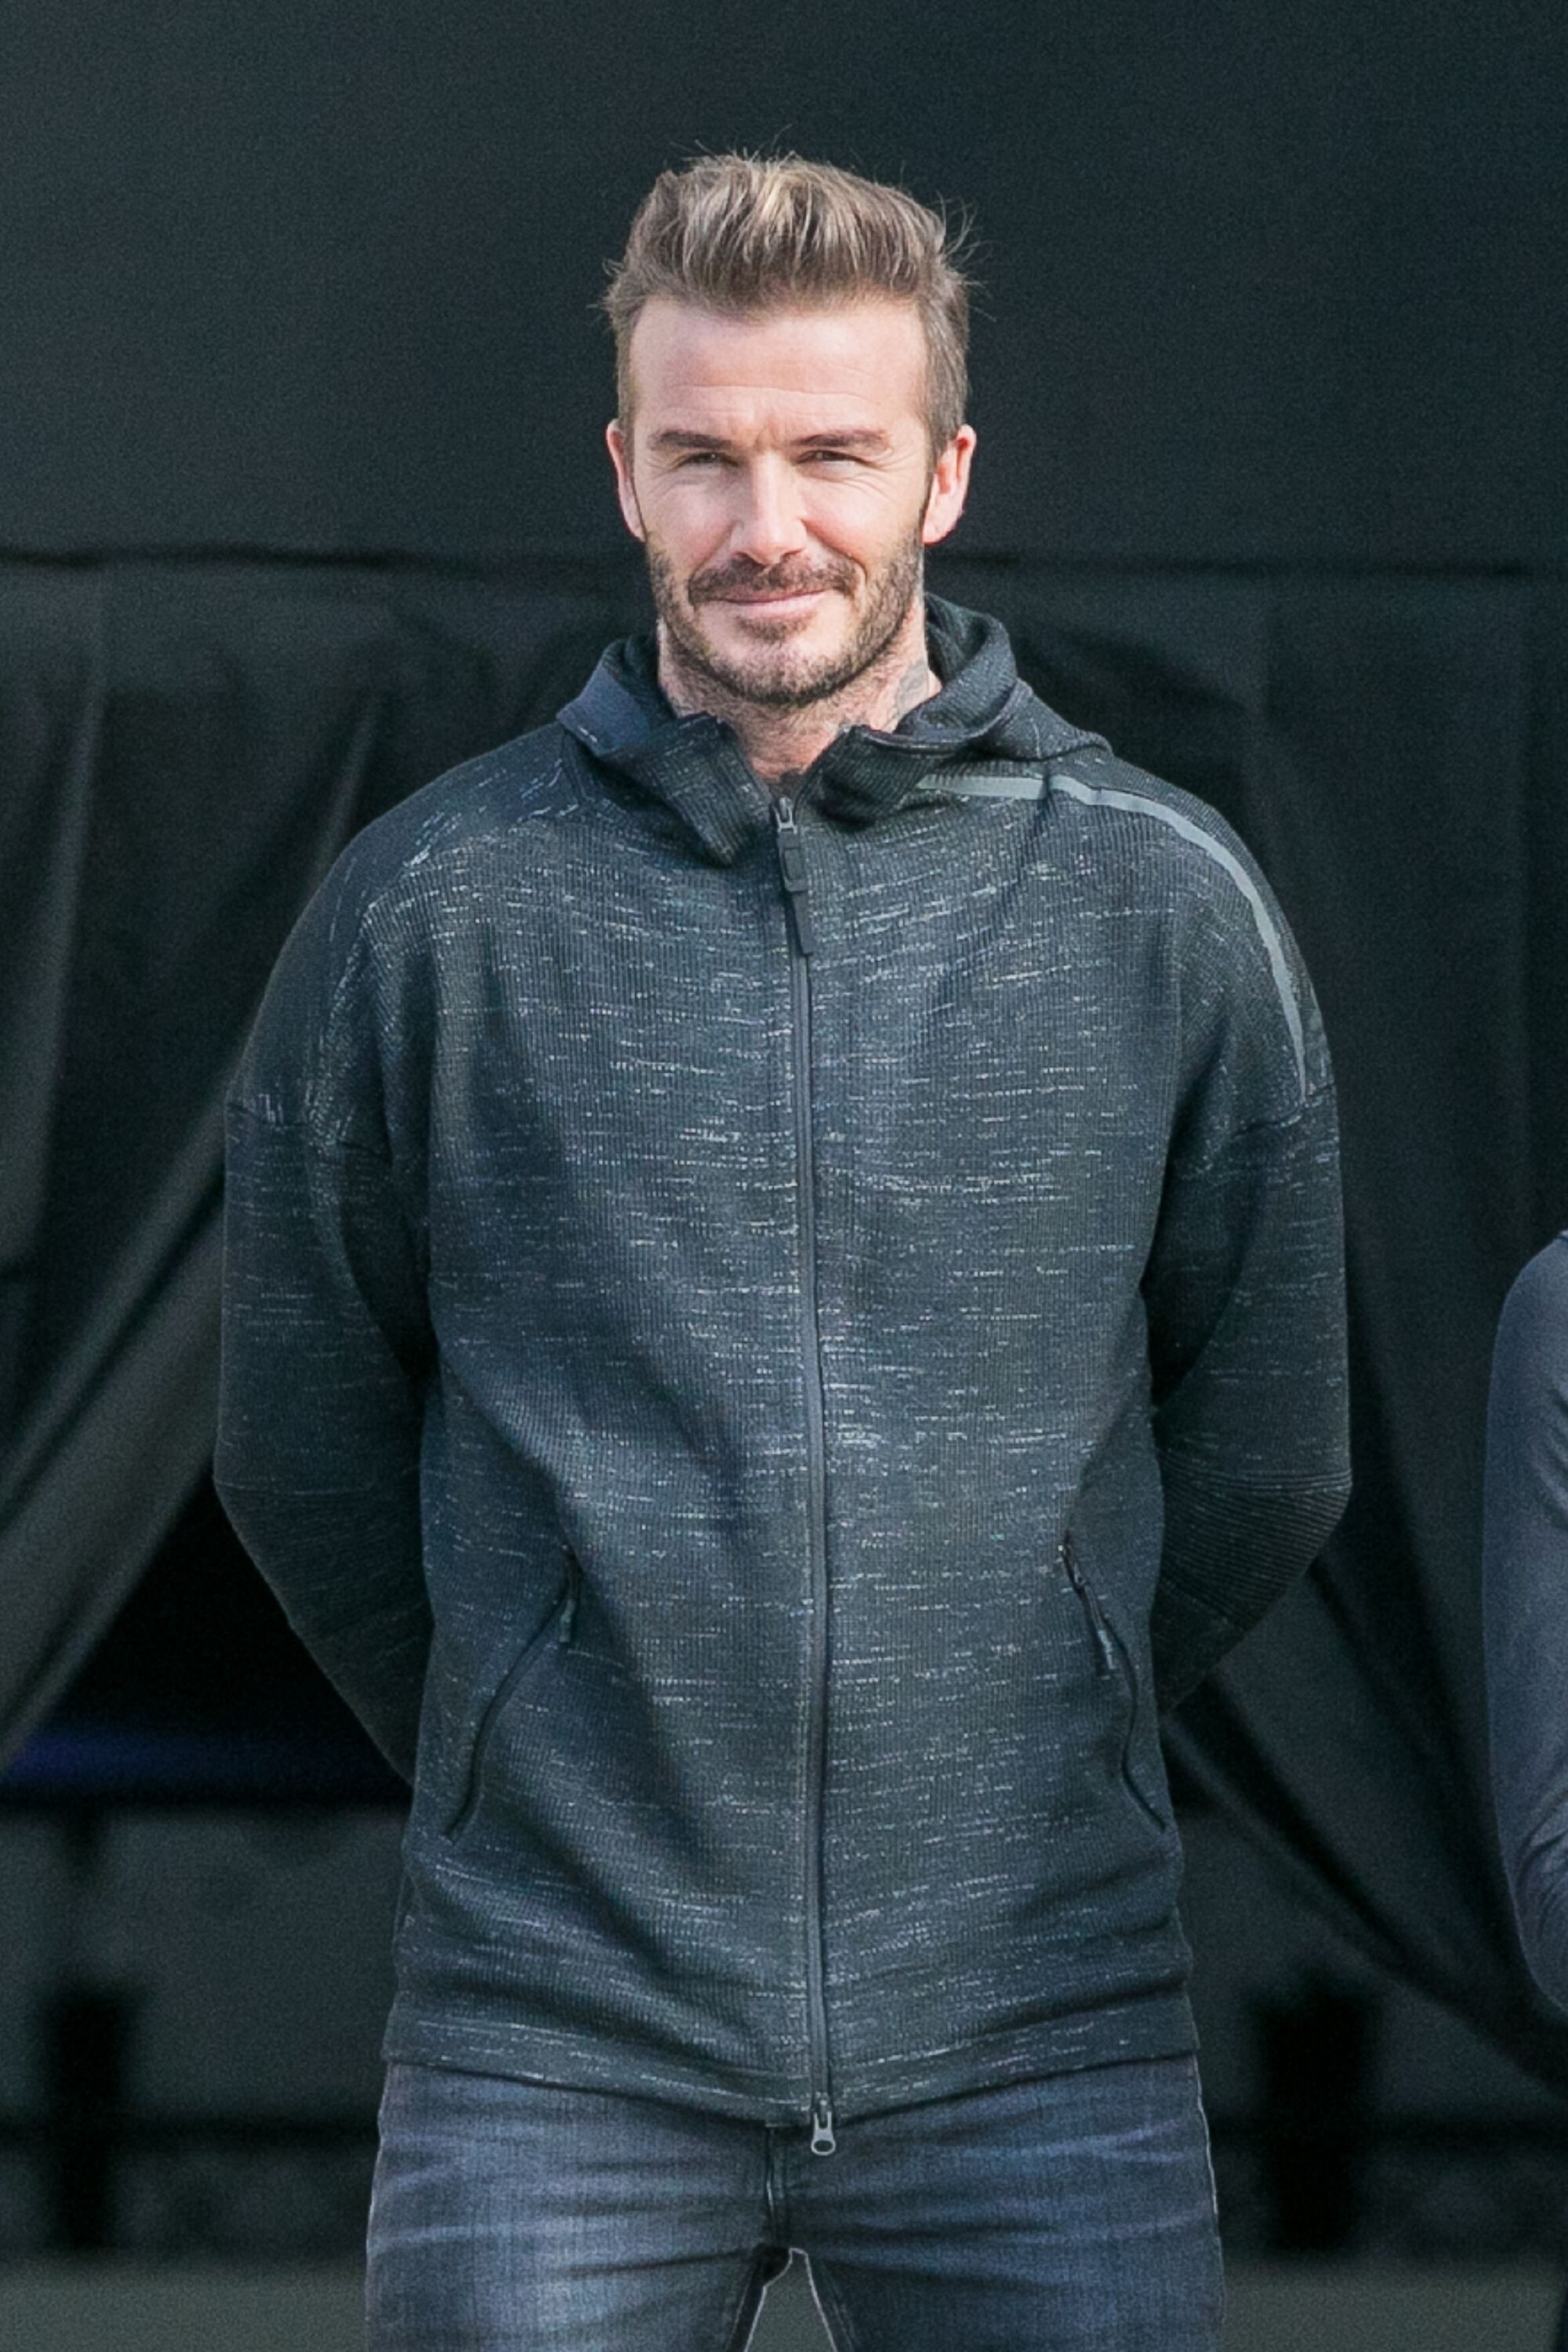 David Beckham attends the 'Create with Beckham' by Adidas Paris event. | Source: Getty Images